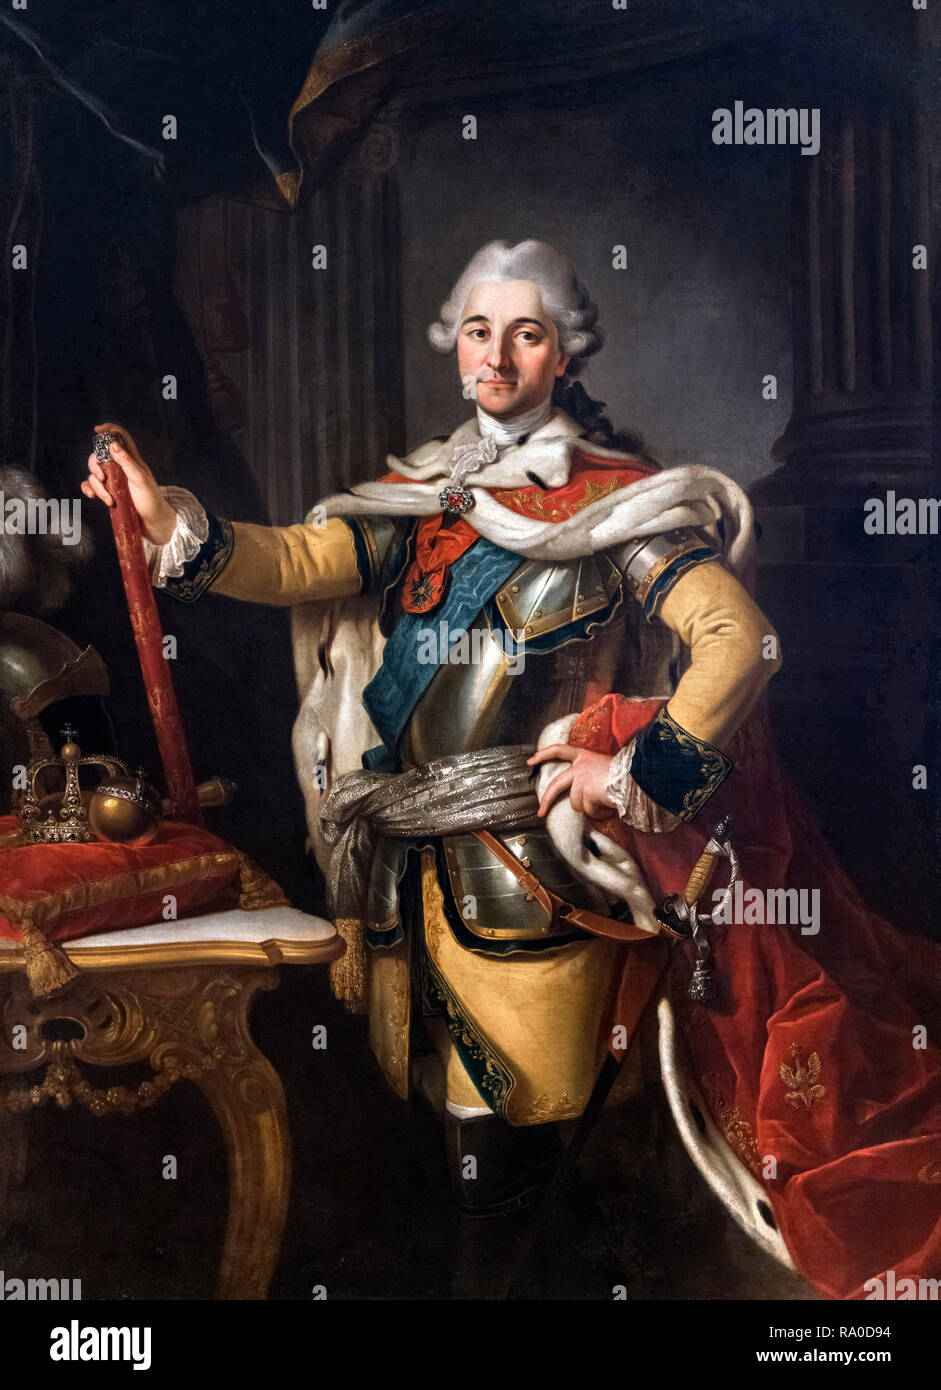 Portrait of Stanisław August Poniatowski (1732-1798) by Per Krafft the Elder (1724-1793), oil on canvas, c.1767. Stanislaw II Augustus was King of Poland and Grand Duke of Lithuania from 1764 to 1795, and was the last monarch of the Polish-Lithuanian Commonwealth. Stock Photo